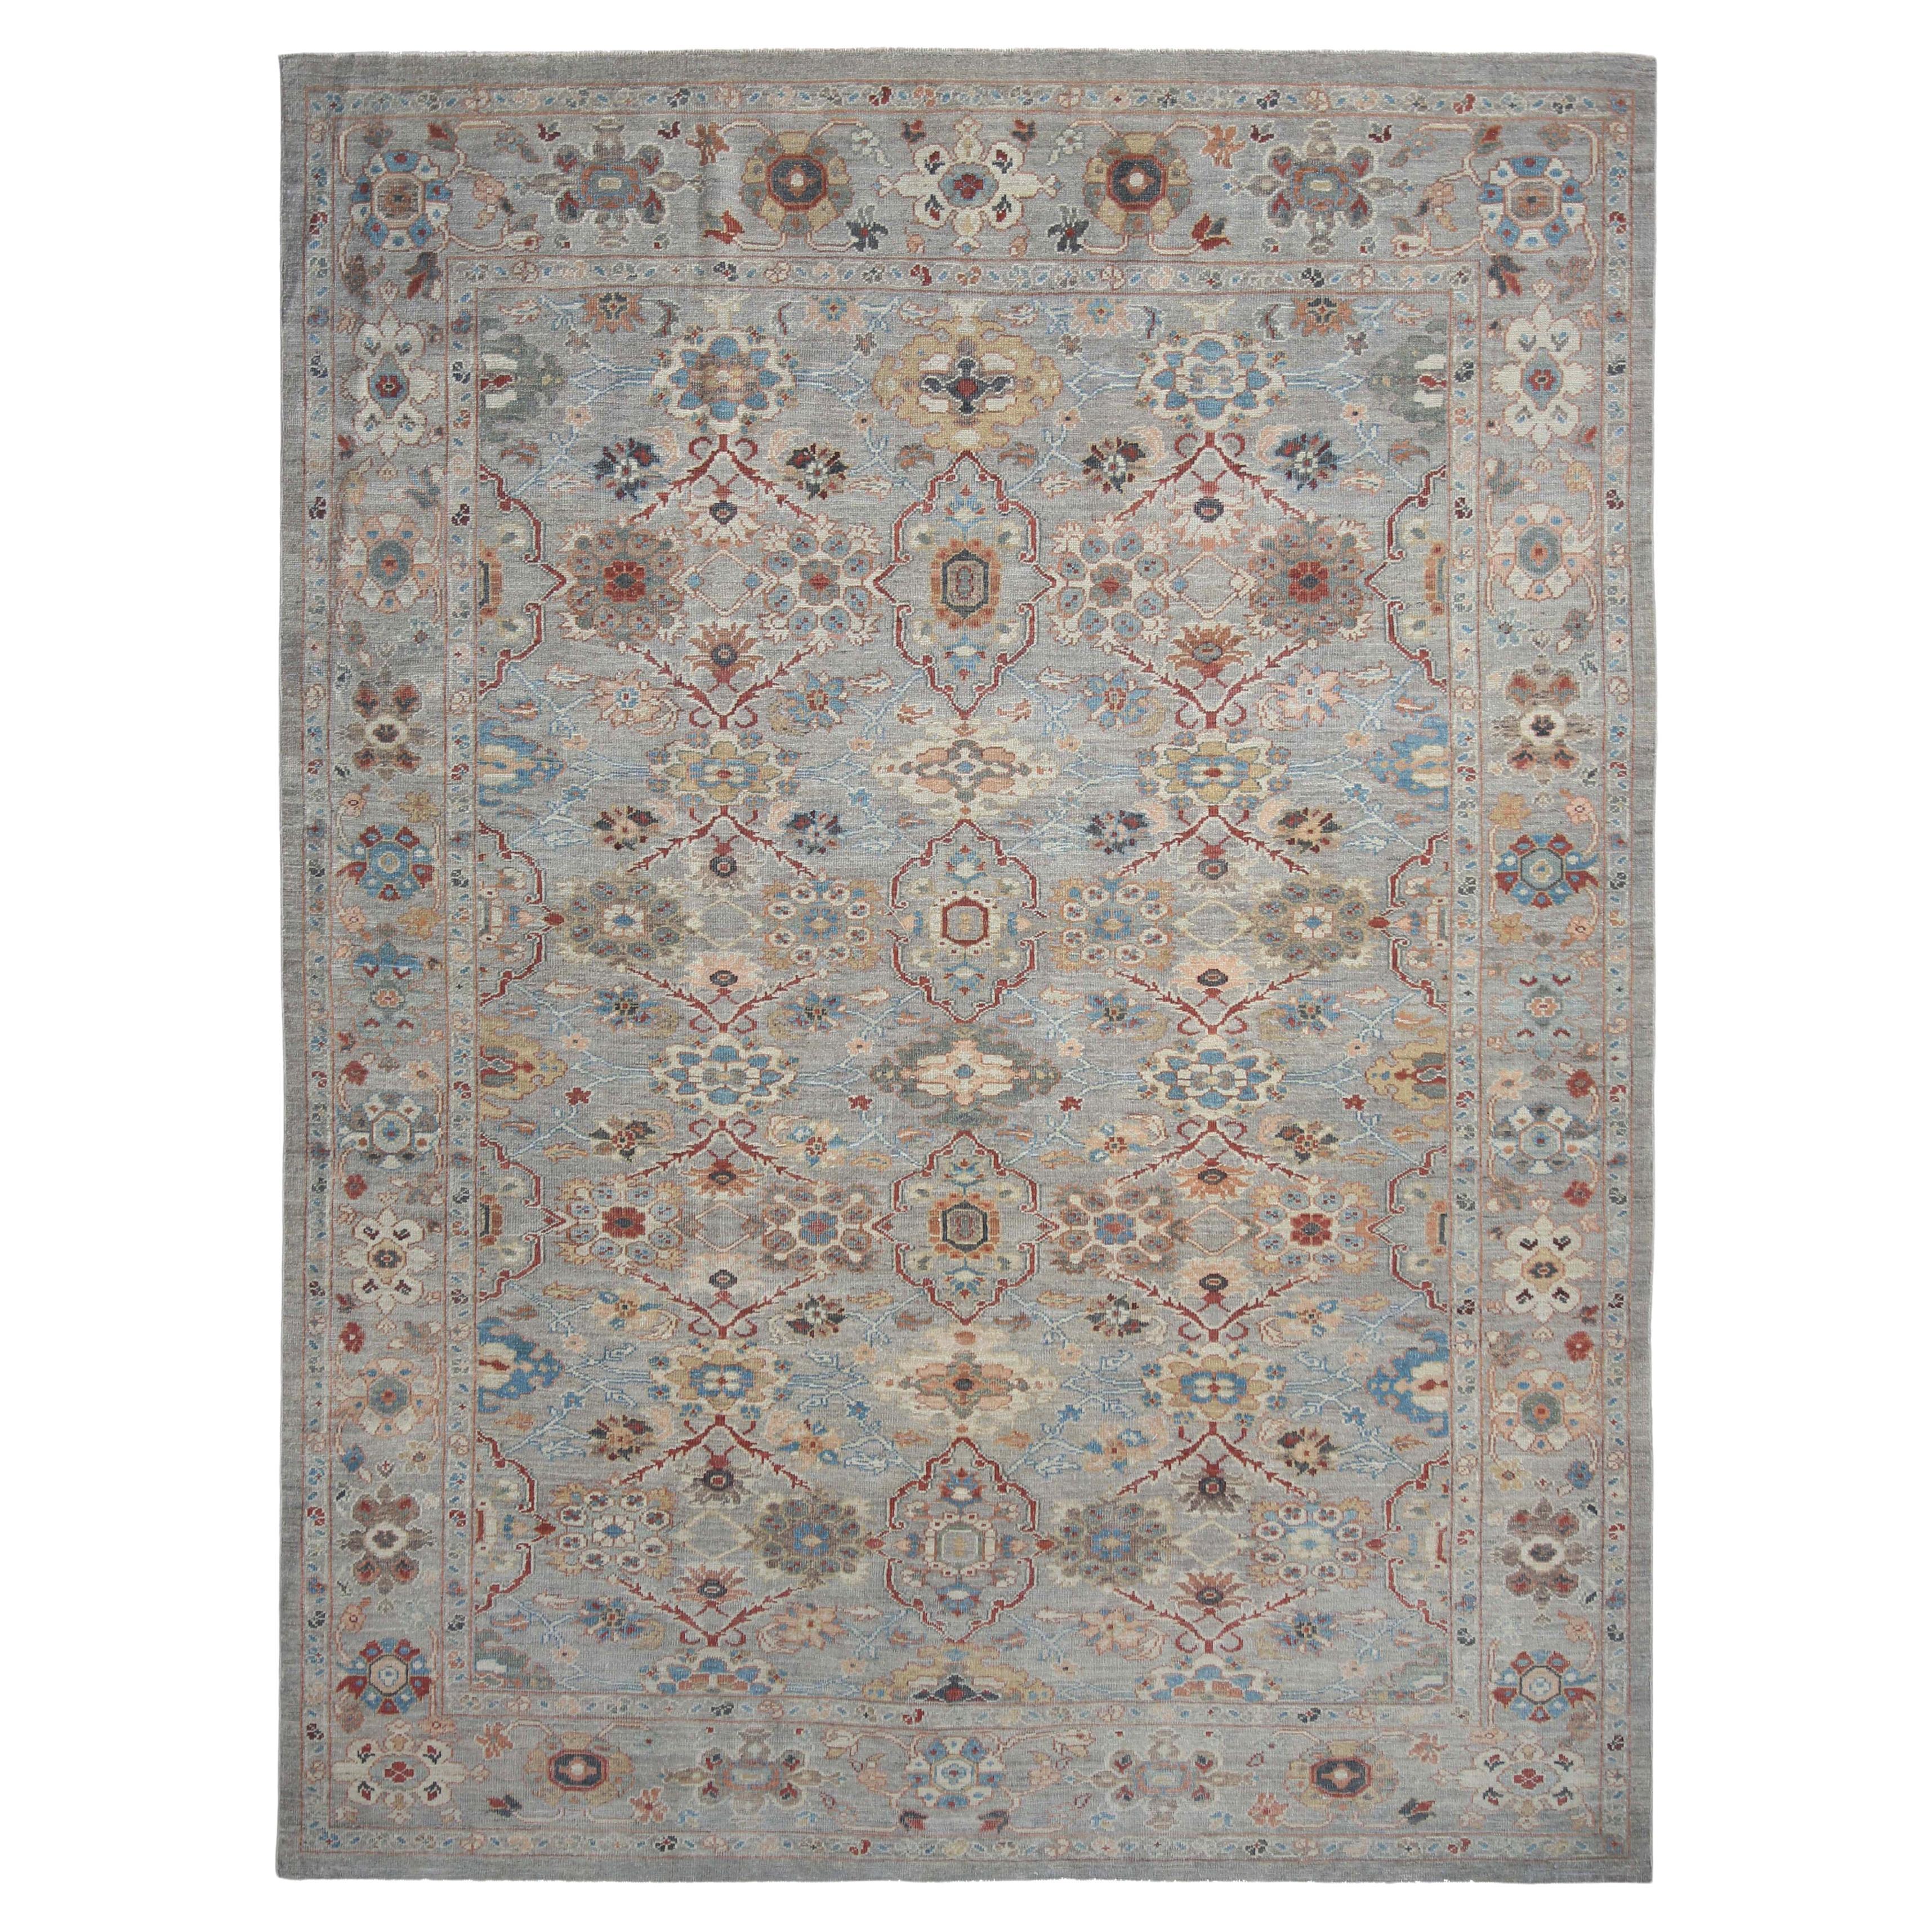 Exquisite Detailed Sultanabad Rug Design For Sale